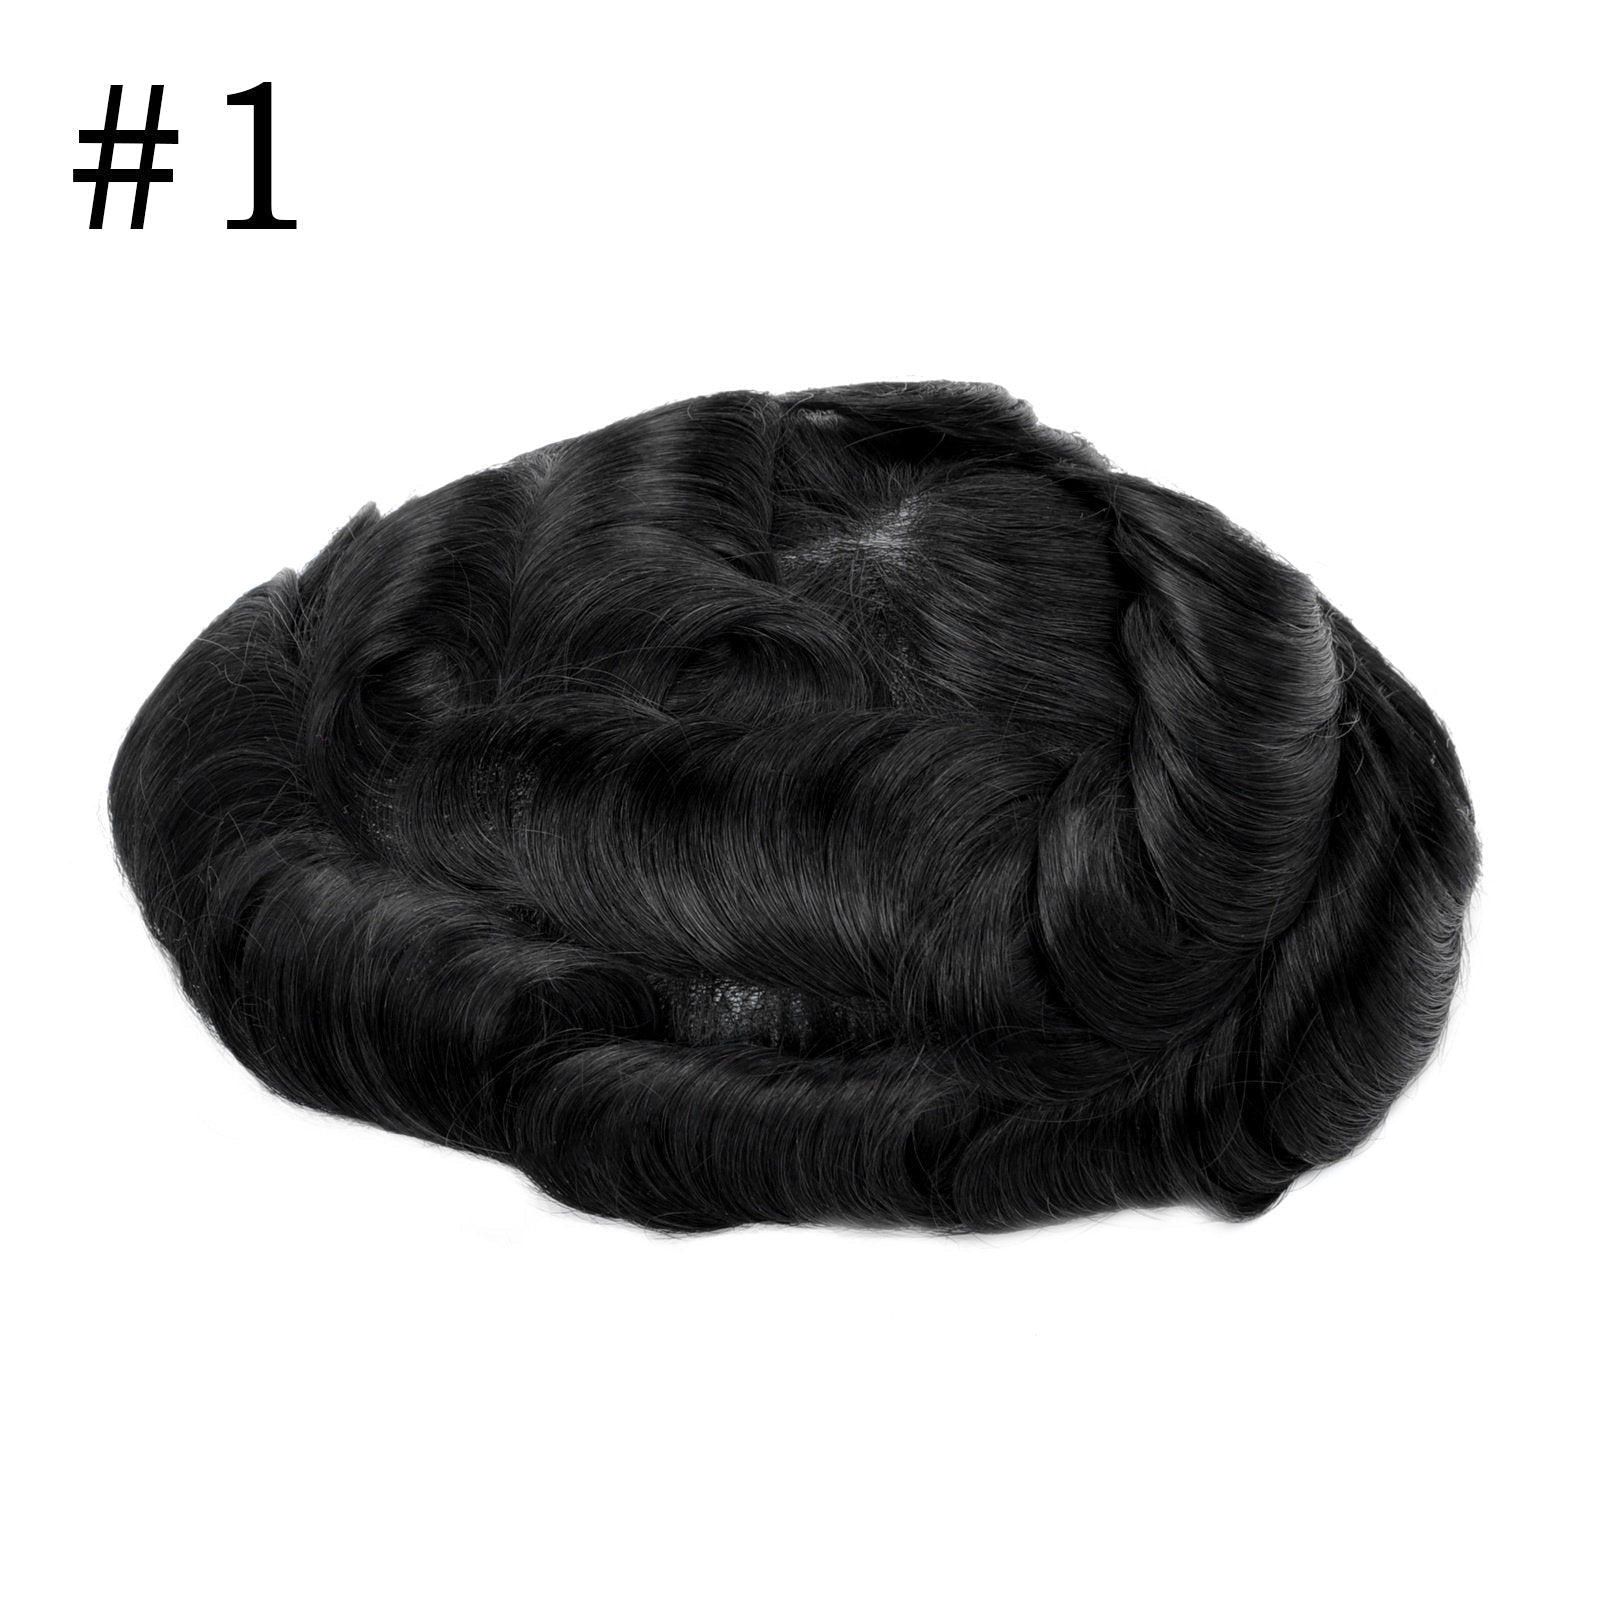 GEXWIGS Thin Skin Toupee Human Hair Replacement for Men Single Knot.